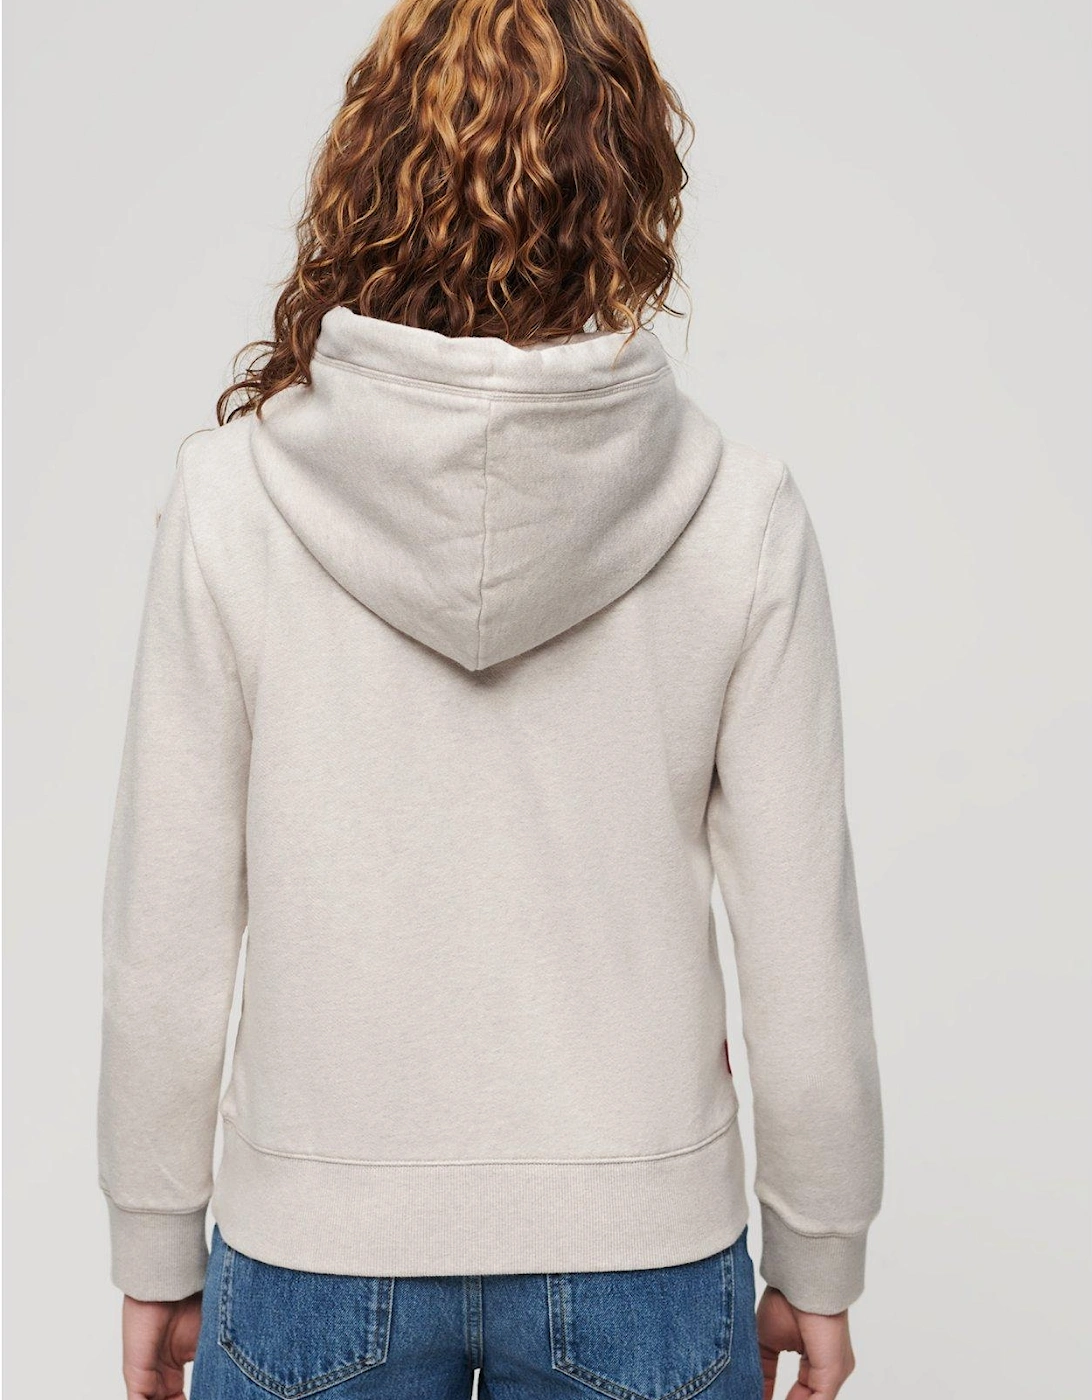 Embroidered Vl Graphic Hoodie - Cream